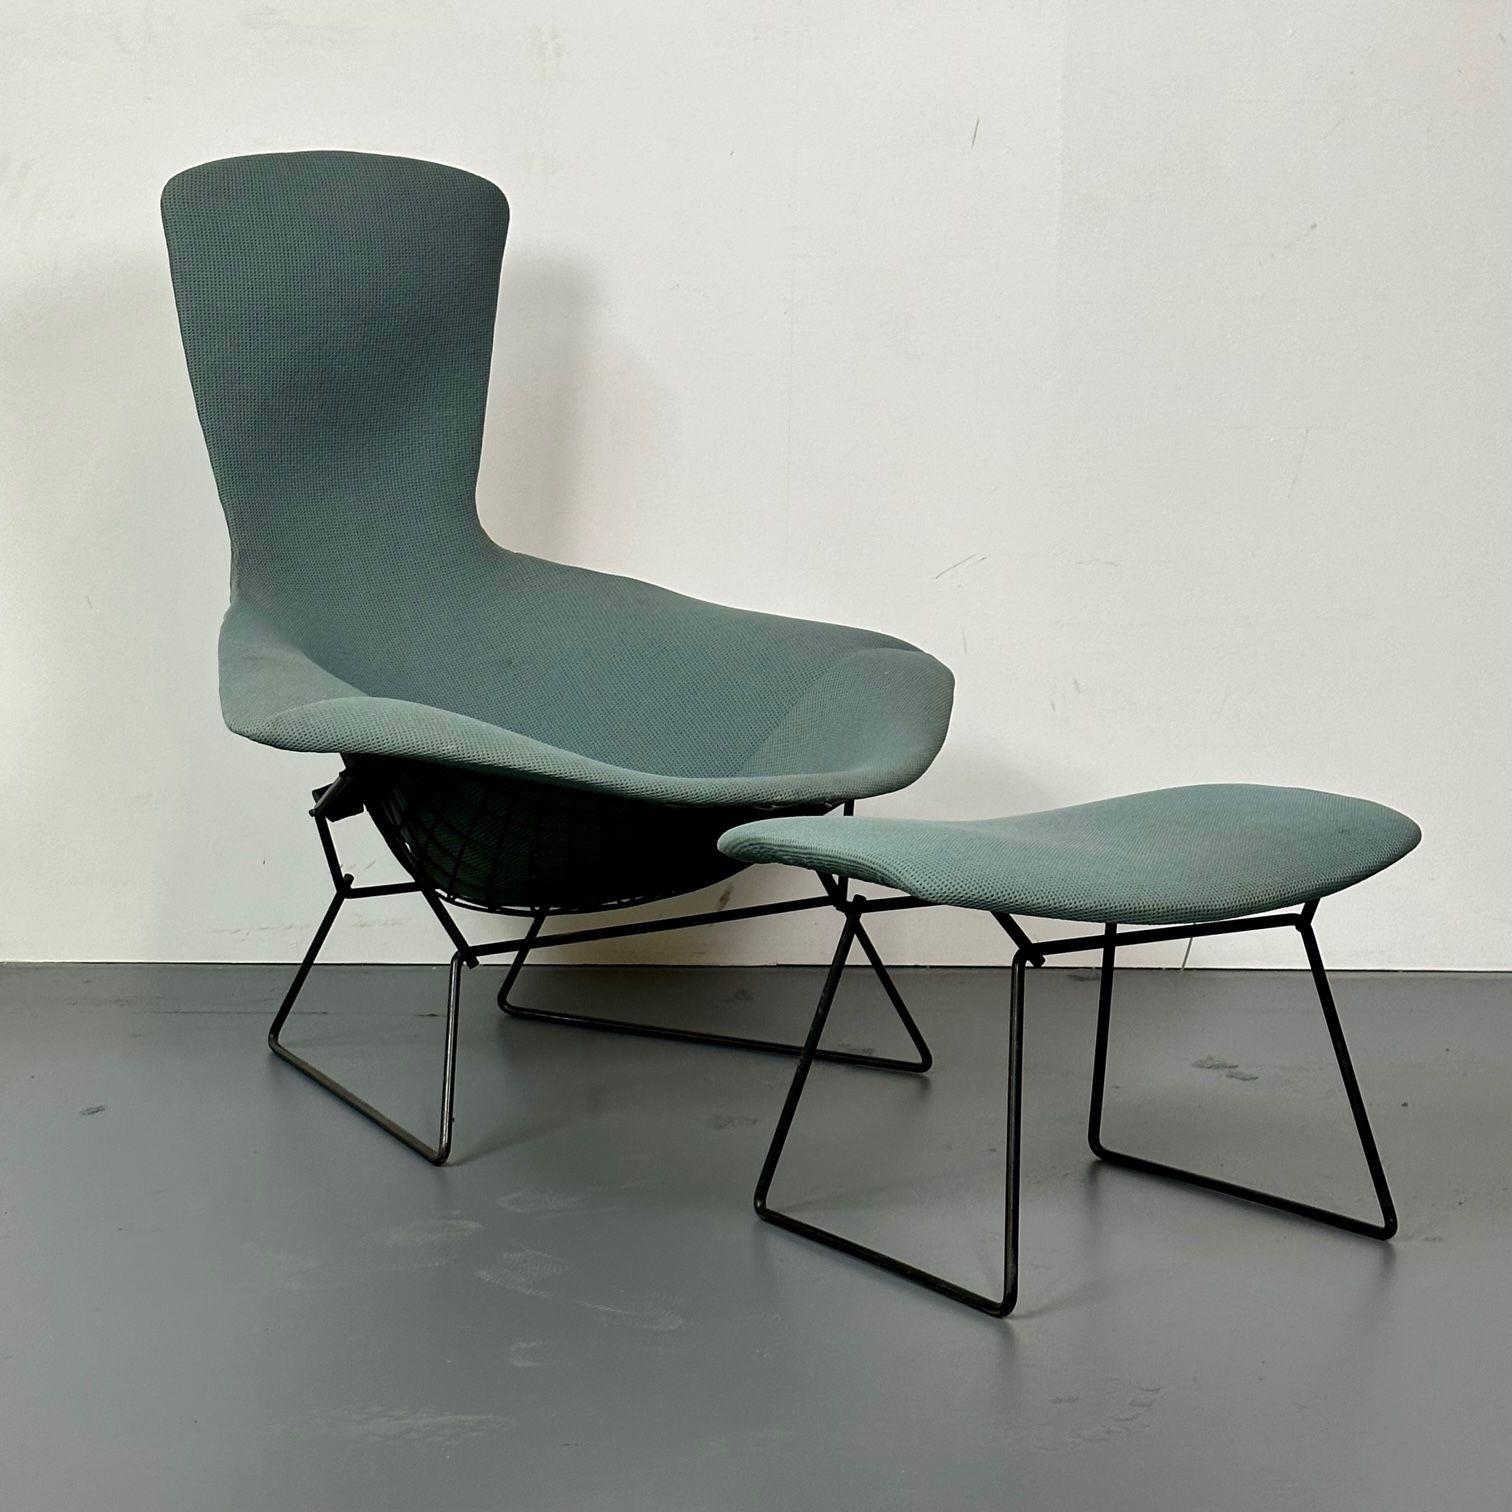 Vintage Harry Bertoia for Knoll Bird Lounge chair with ottoman, Labeled, 1960s, Original Upholstery
 
Originally designed in 1952, these ergonomic lounge chairs are both comfortable and stylish. Bertoia chairs are unique fusions of sculpture,